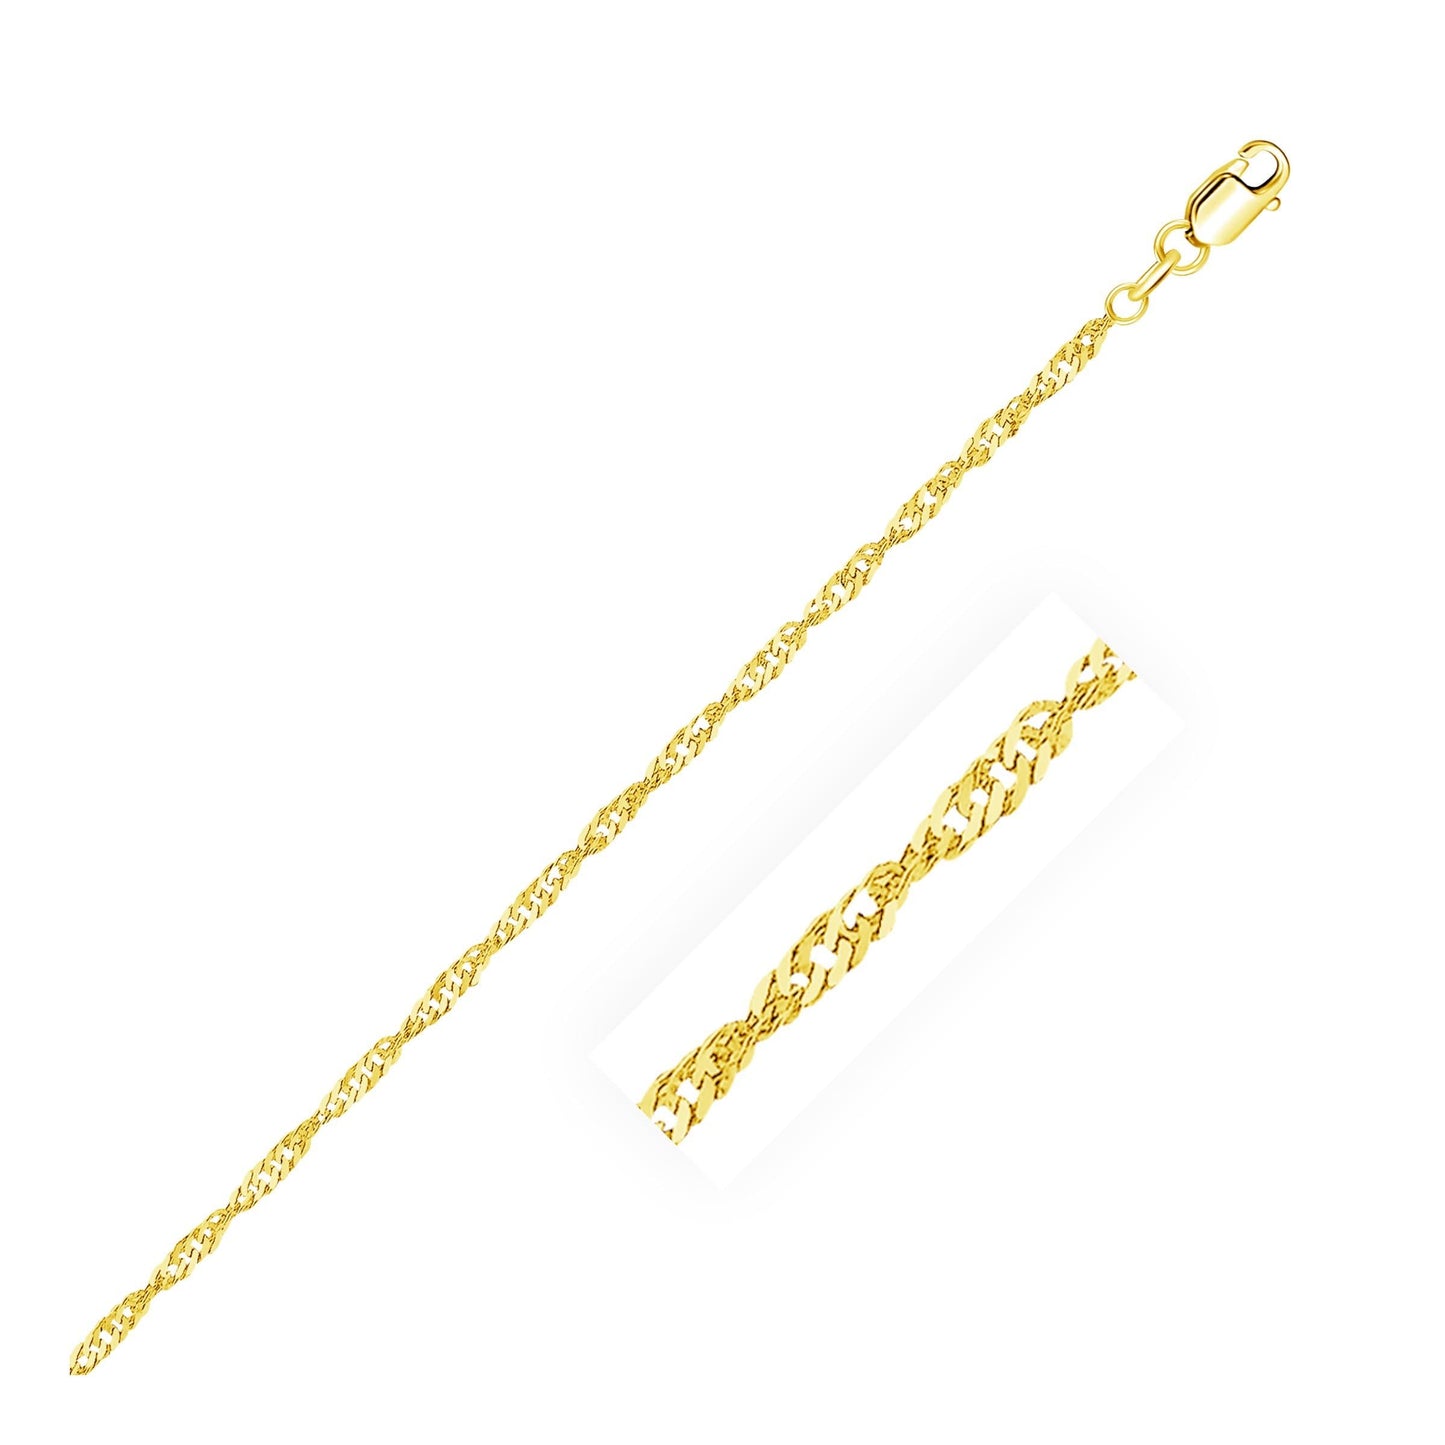 Polished 14k Yellow Gold Anklet